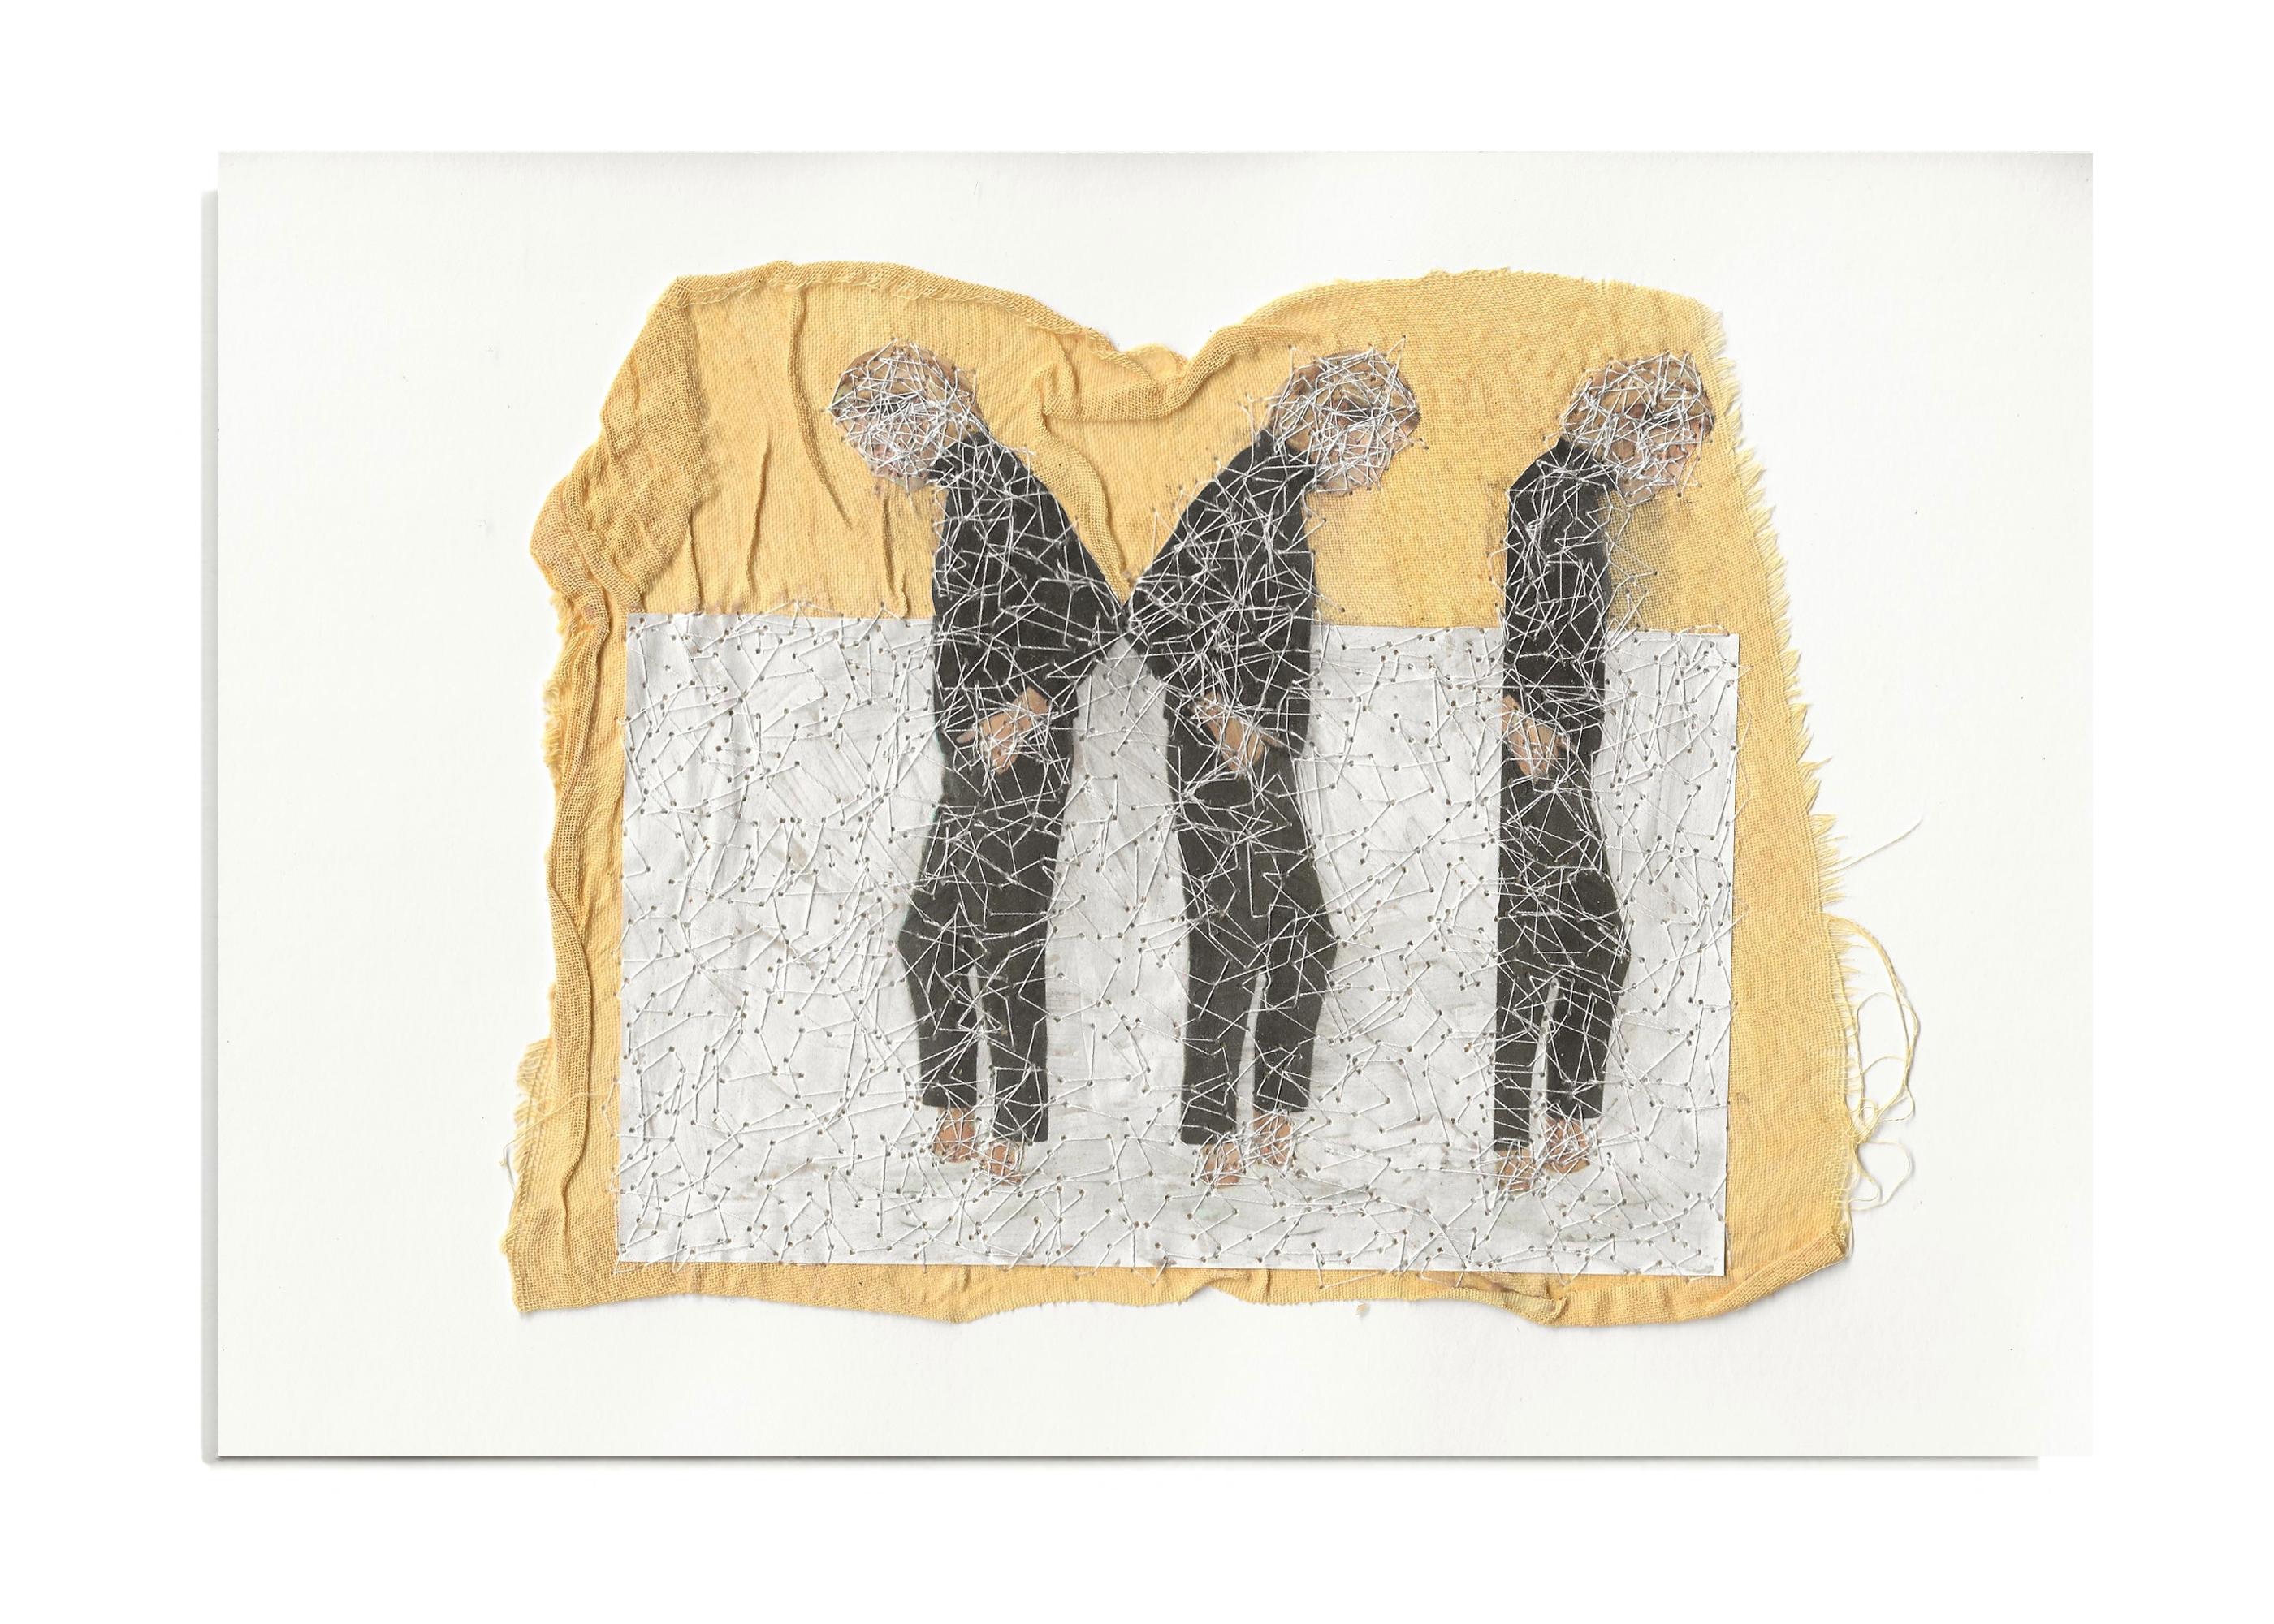 She 50 - yellow contemporary embroidered photo transfer of women on fabric - Mixed Media Art by Michele Landel